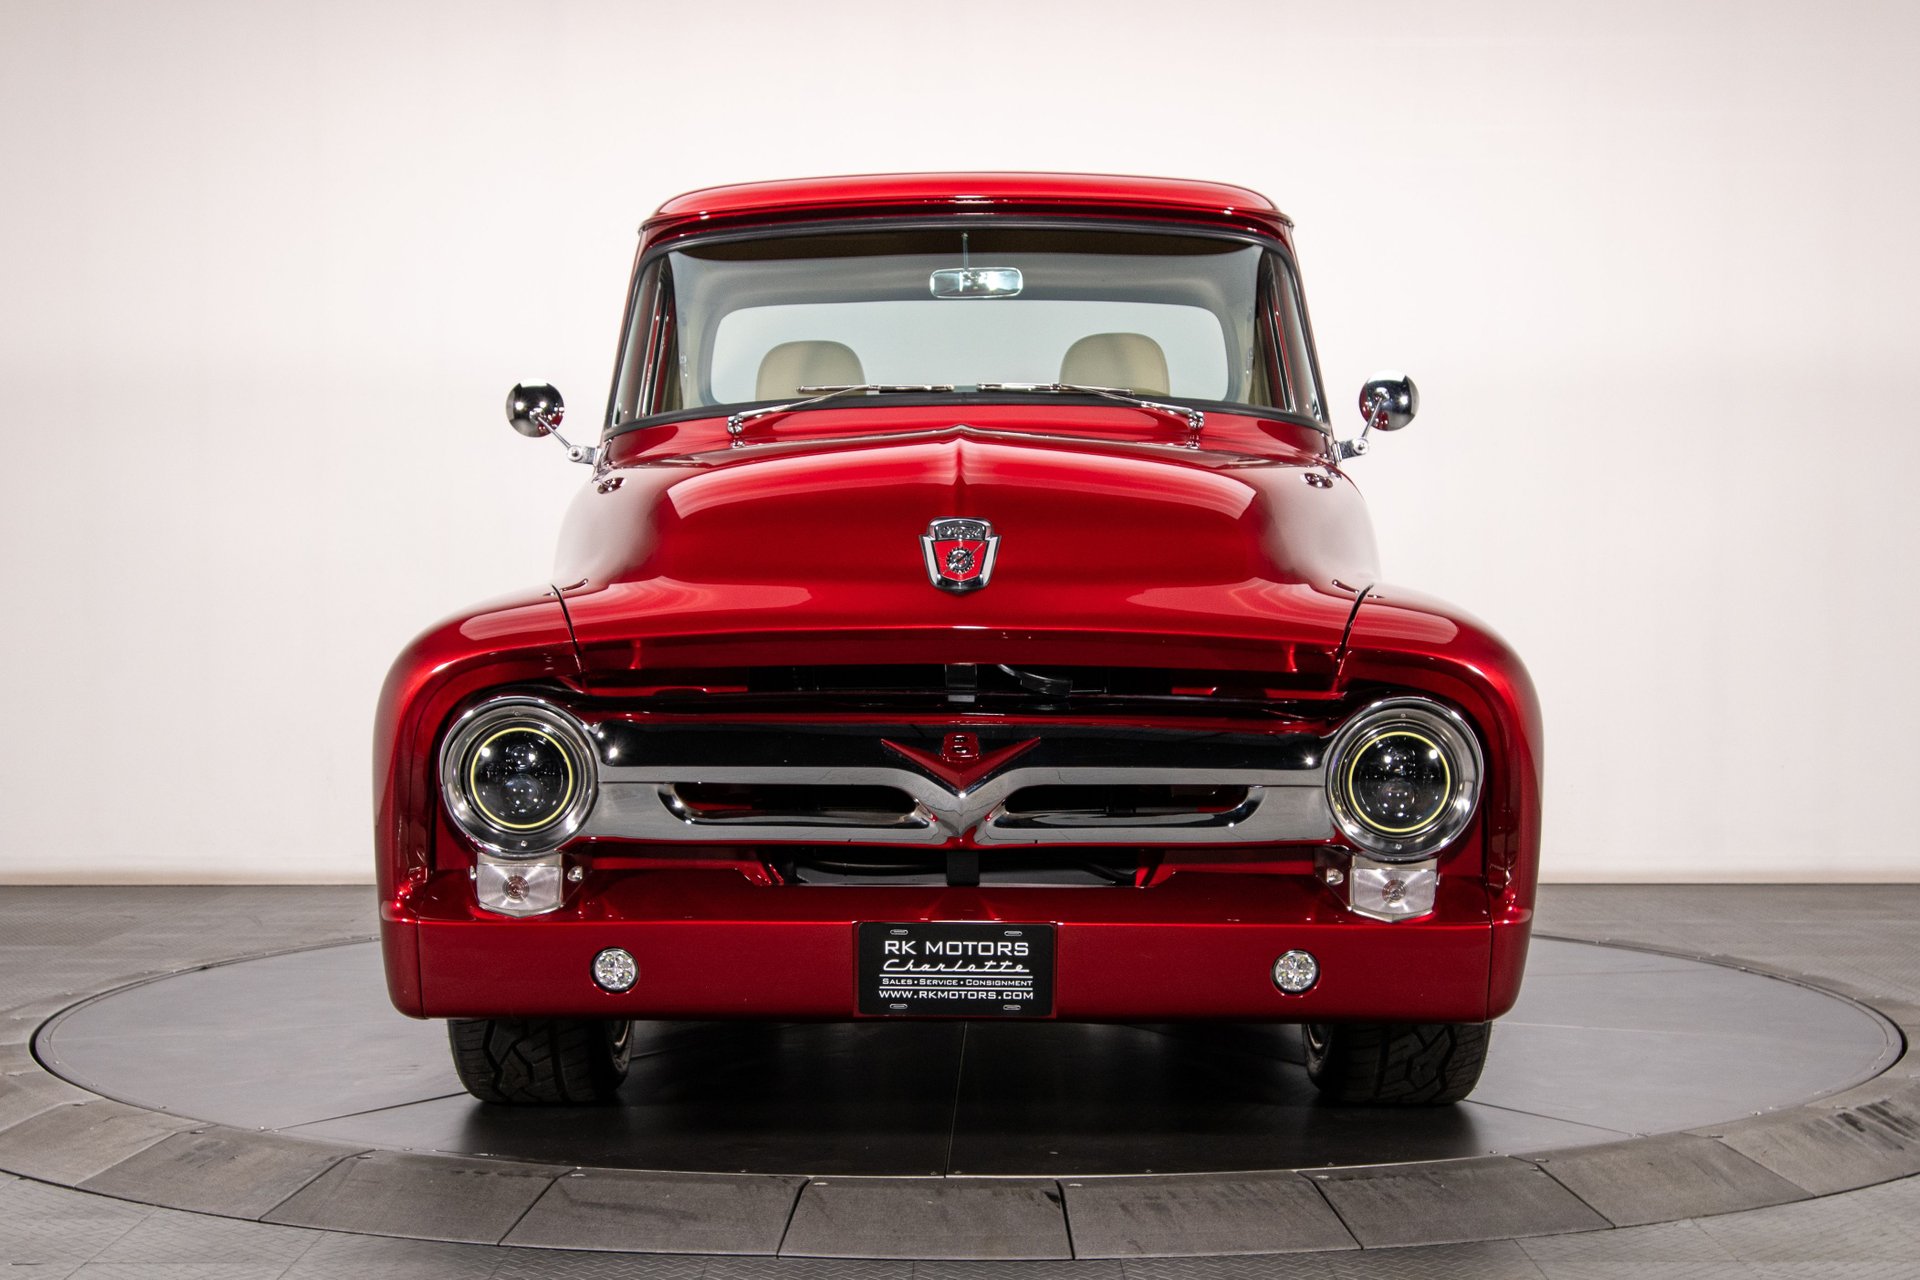 RK Motors Charlotte on X: Anyone in the mood for a little candy? House Of  Kolor Brandywine candy, that is. 😉 #Ford #F100 #FordTrucks #FordNation  #FordF100 #V8 #Truck #Pickup #ClassicCars #ClassicCarsDaily #HouseOfKolor #